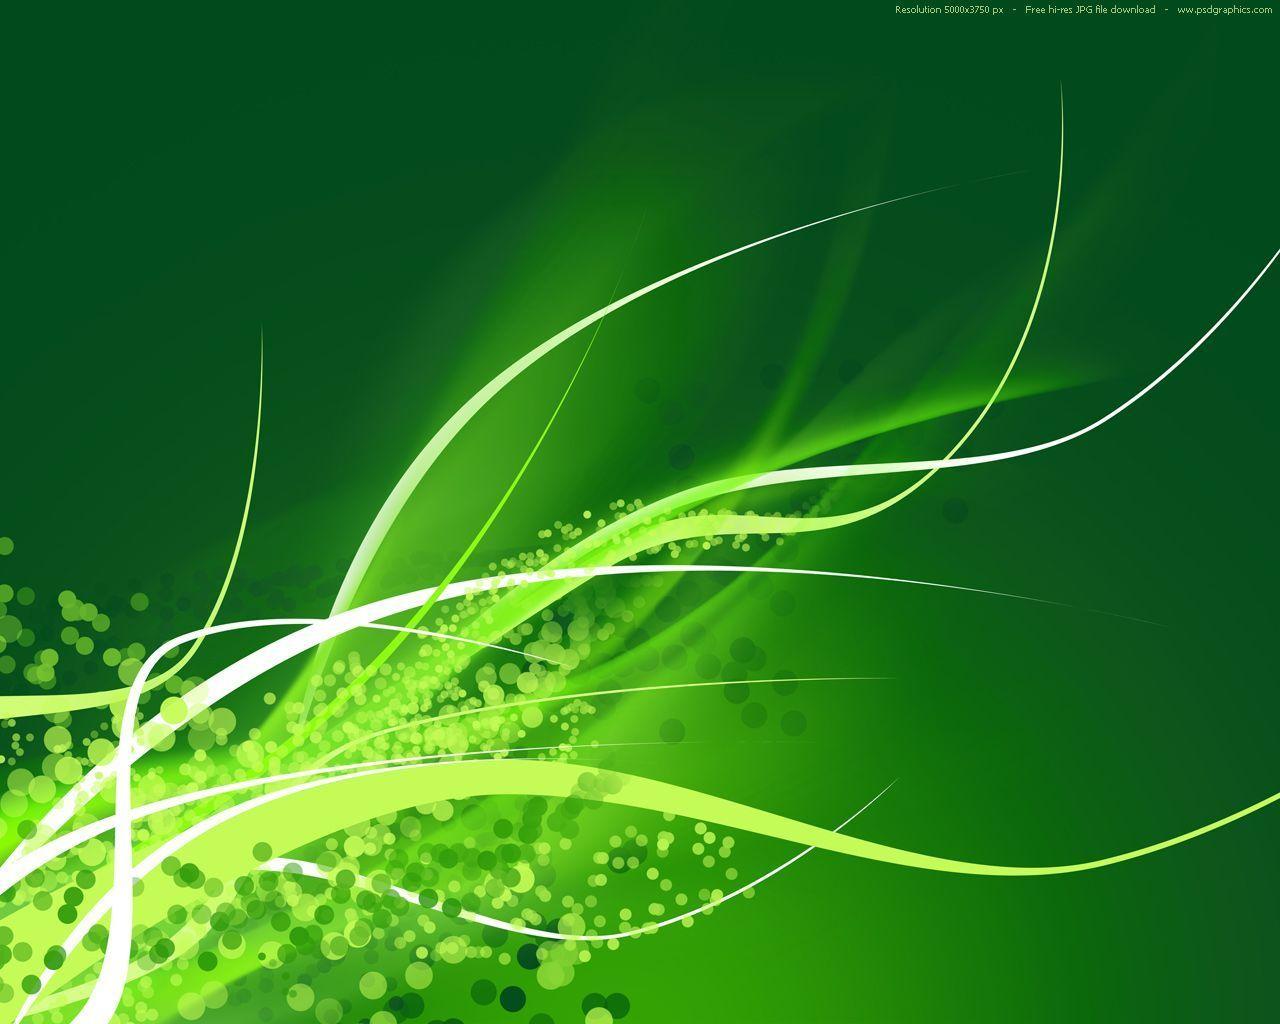 Abstract artwork background